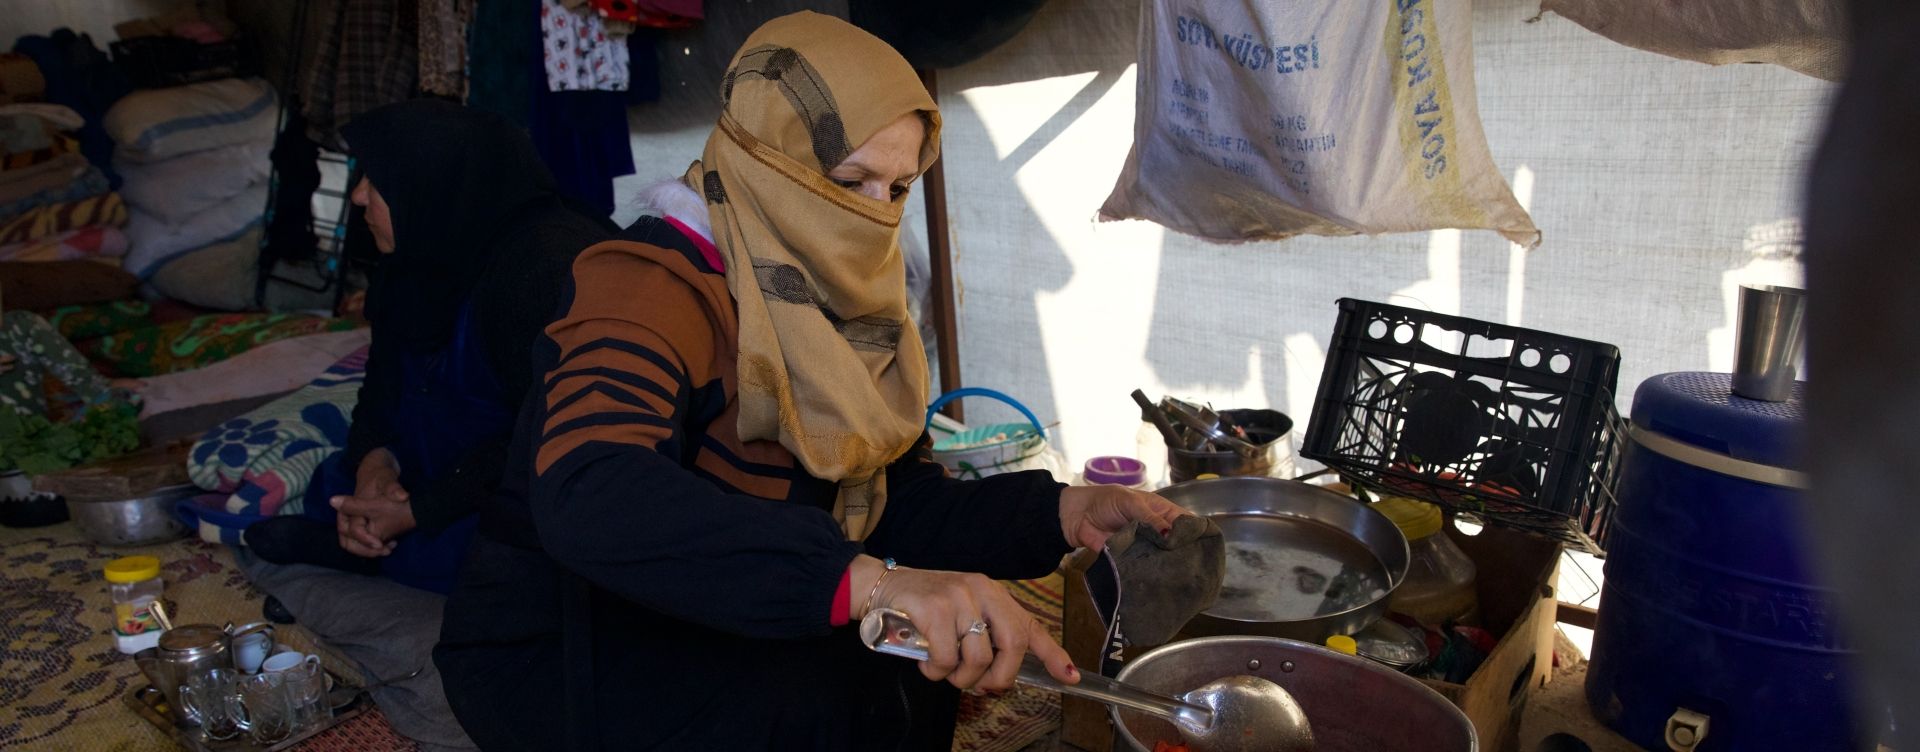 Reem* (30) prepares food for her husband Jaafar* (32) and her children inside their tent in the Ahl al-Khair camp, Syria. (Photo: Ali Haj Suleiman/DEC/Fairpicture)